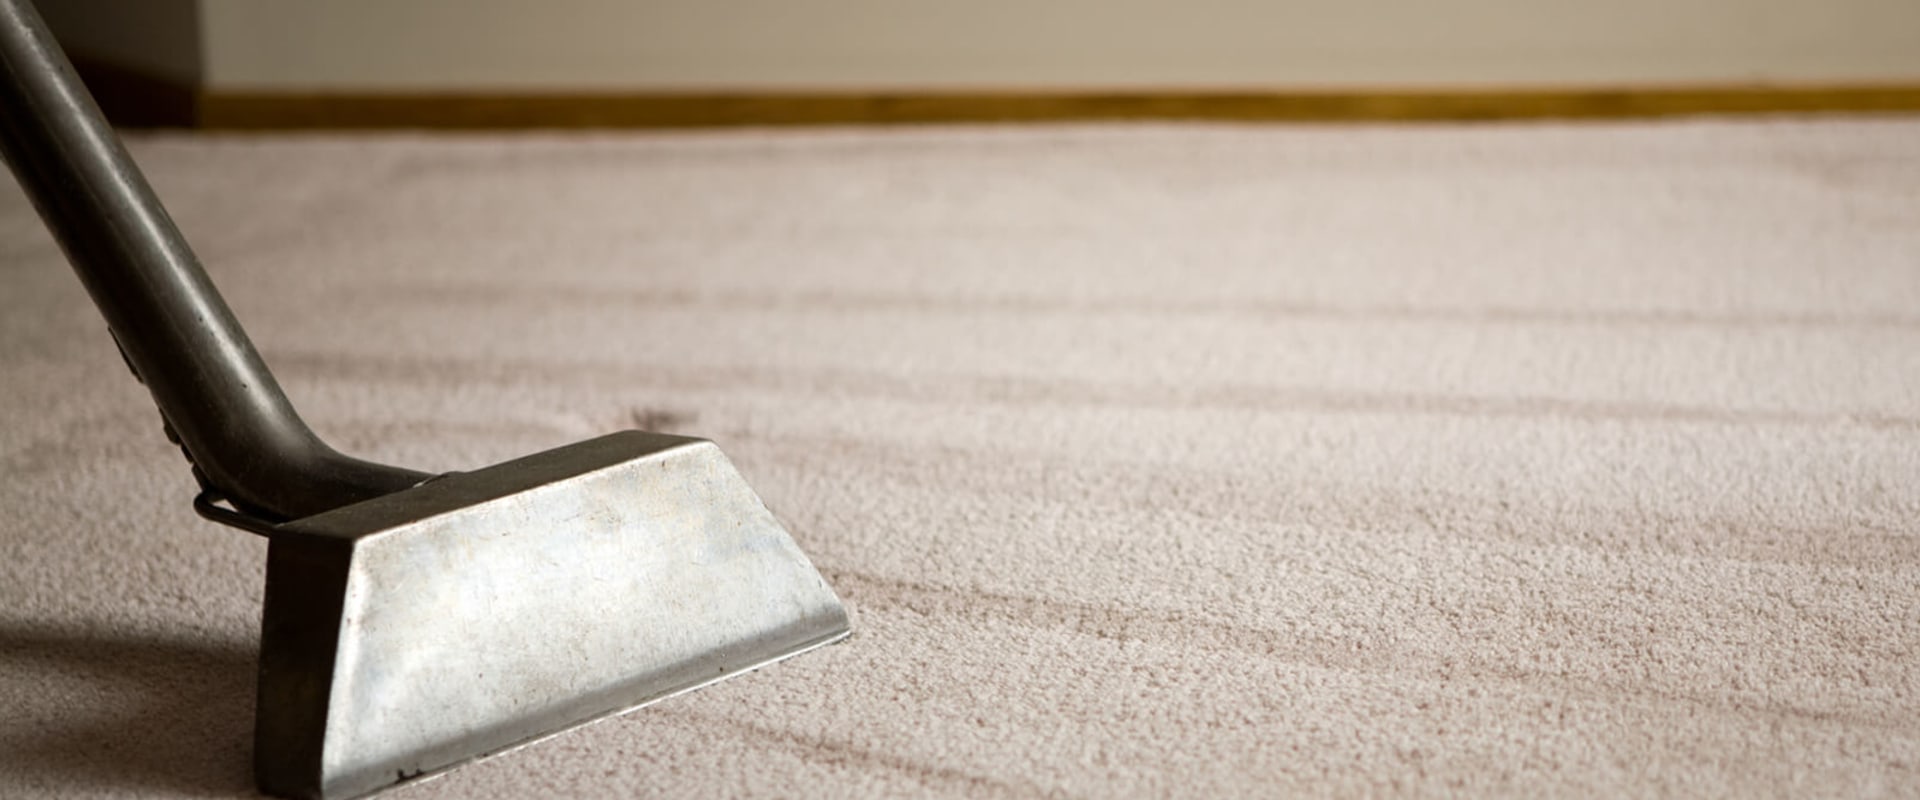 Is Steam Cleaning a Carpet Worth It? - An Expert's Perspective